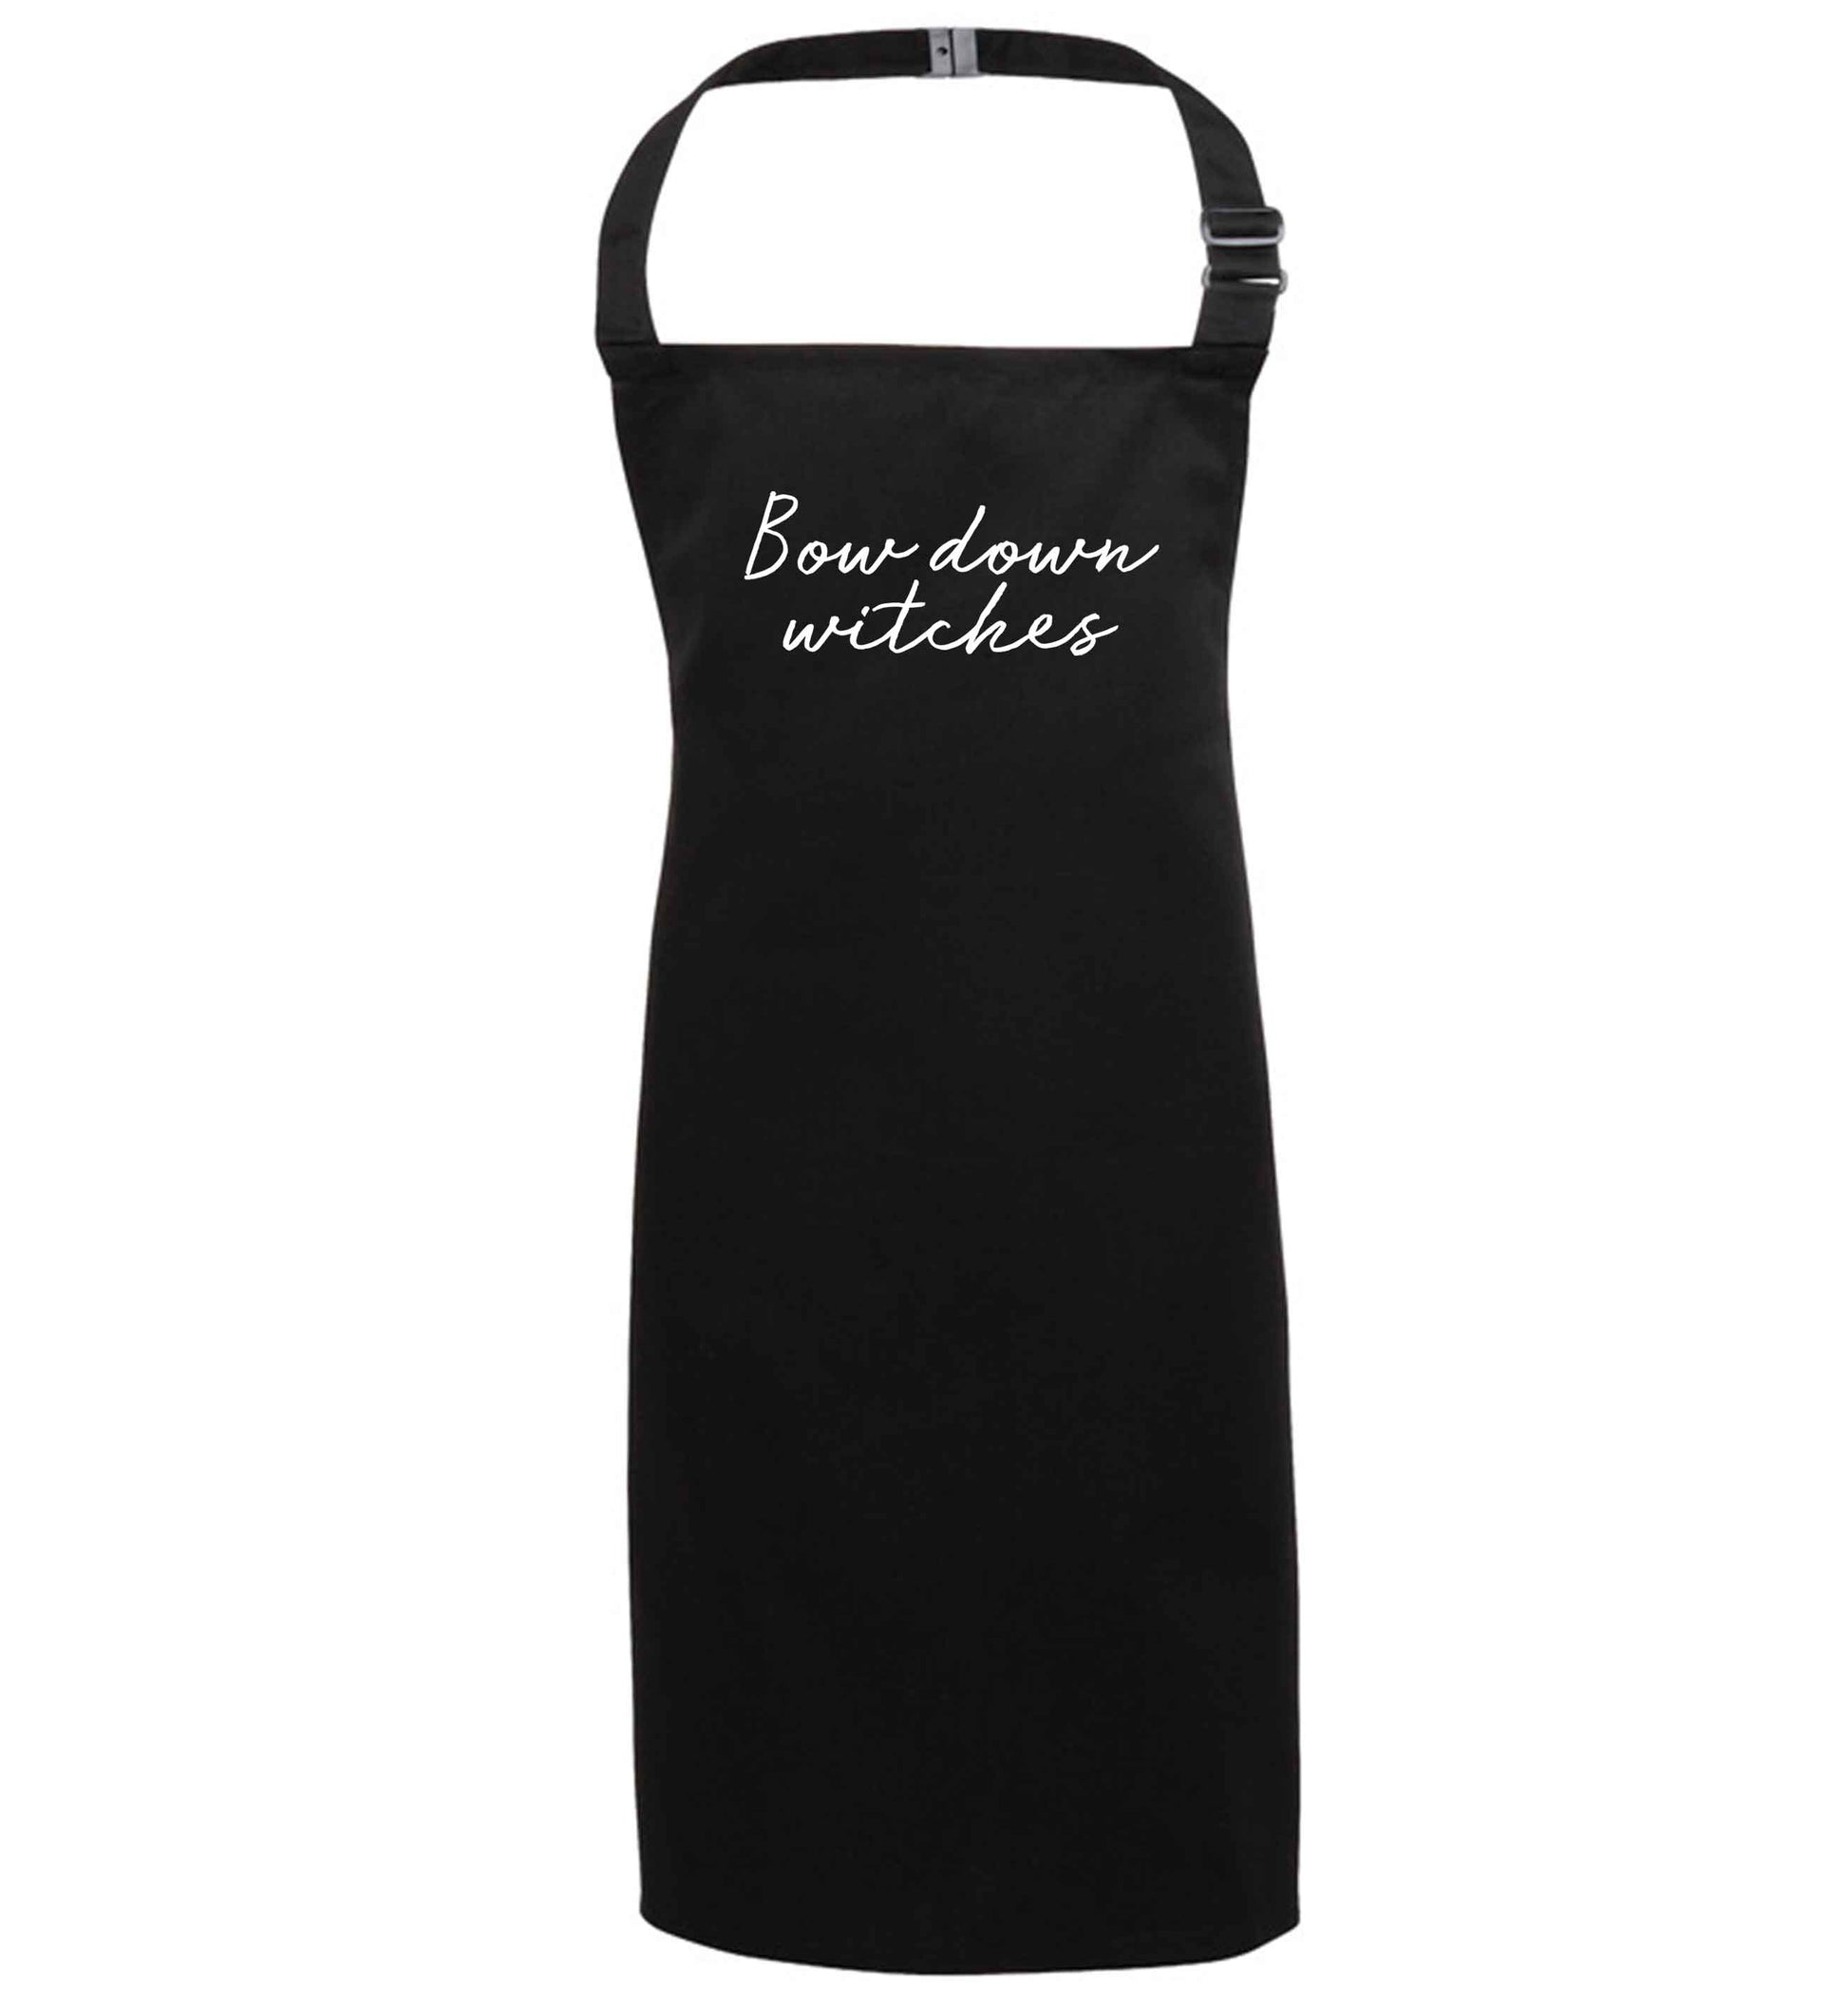 Bow down witches black apron 7-10 years